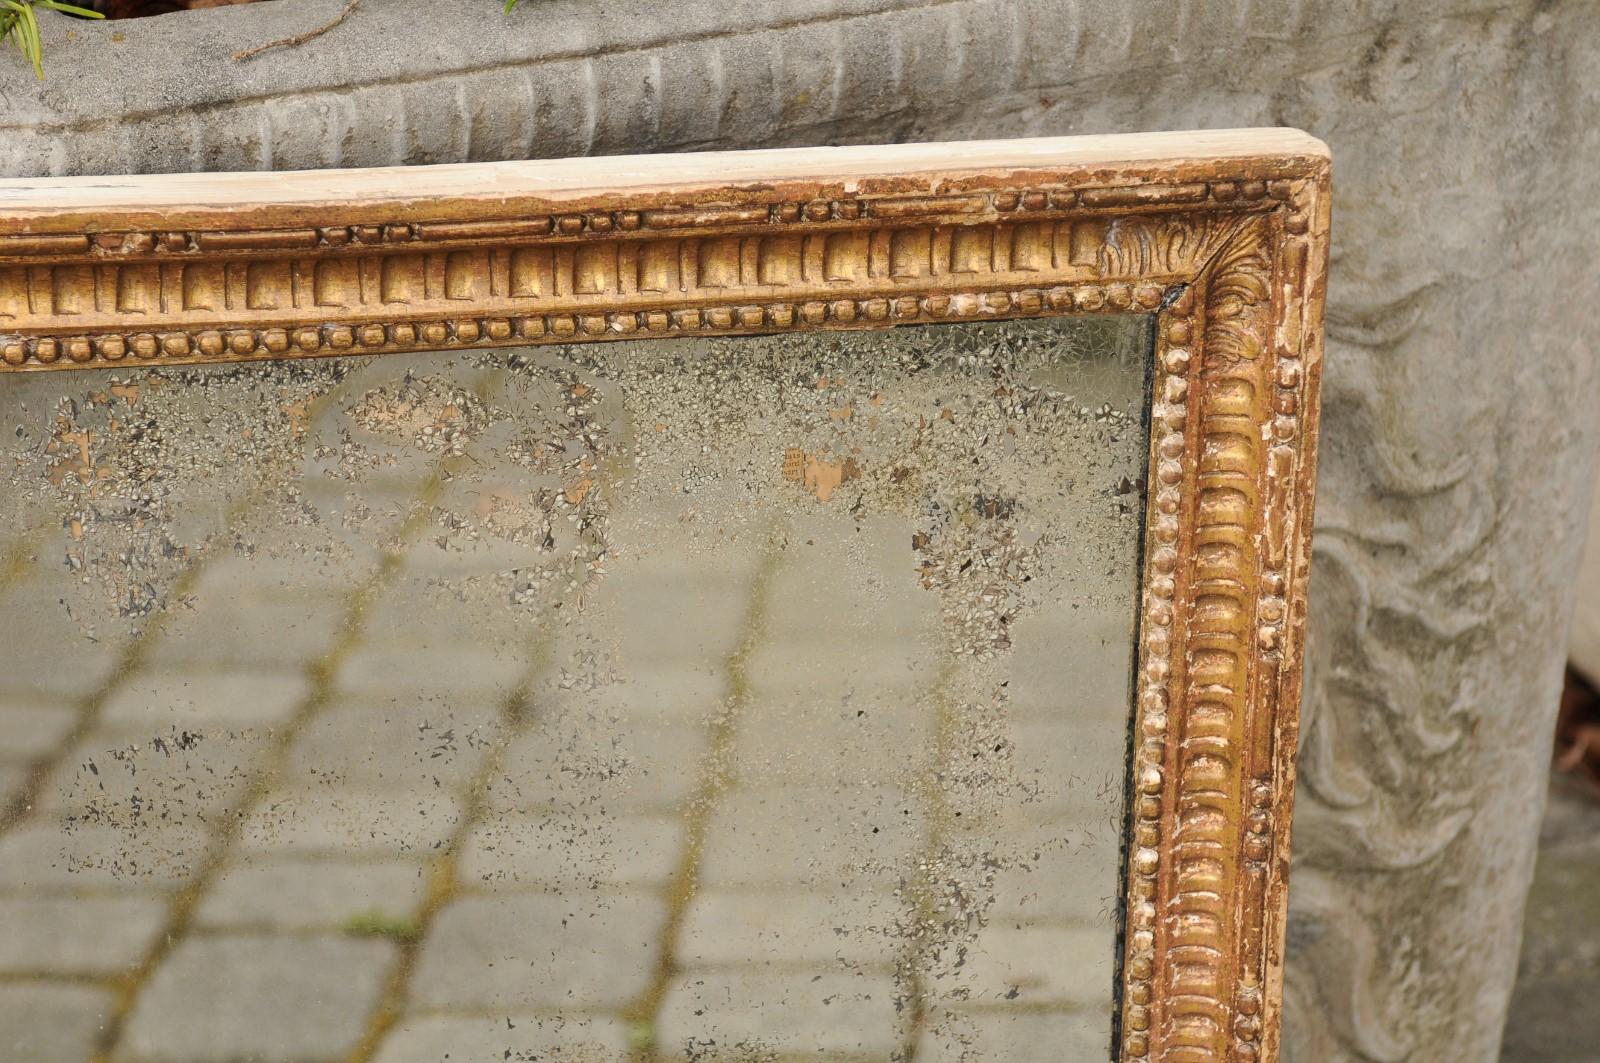 19th Century French 1820s Restauration Period Giltwood Mirror with Scoop Patterns and Beads